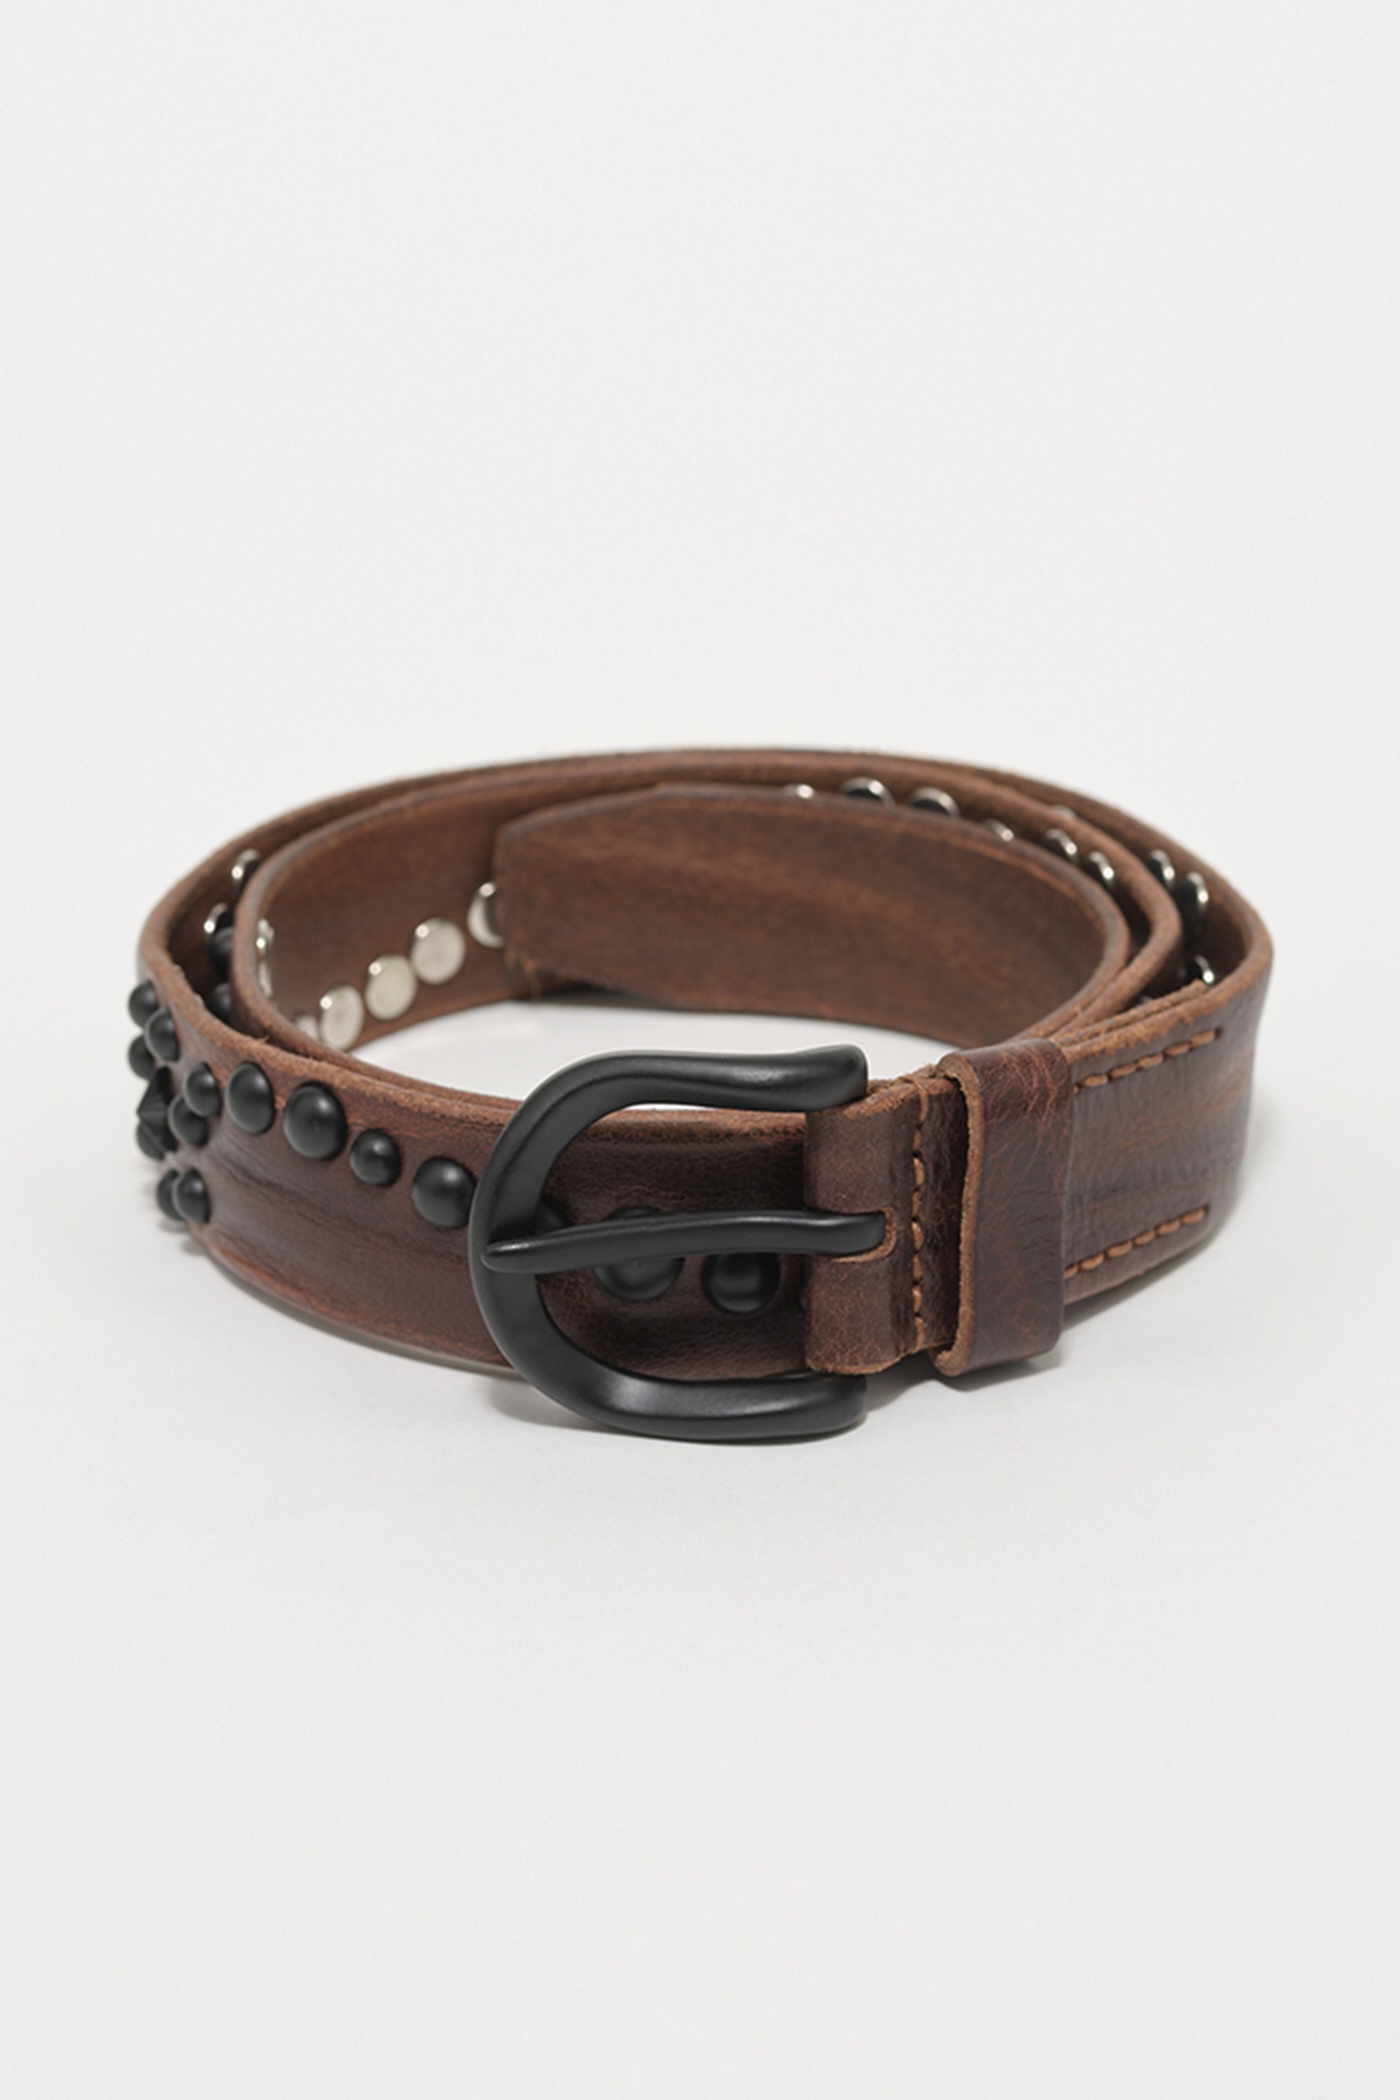 Star Fall Belt Brown Leather - 1